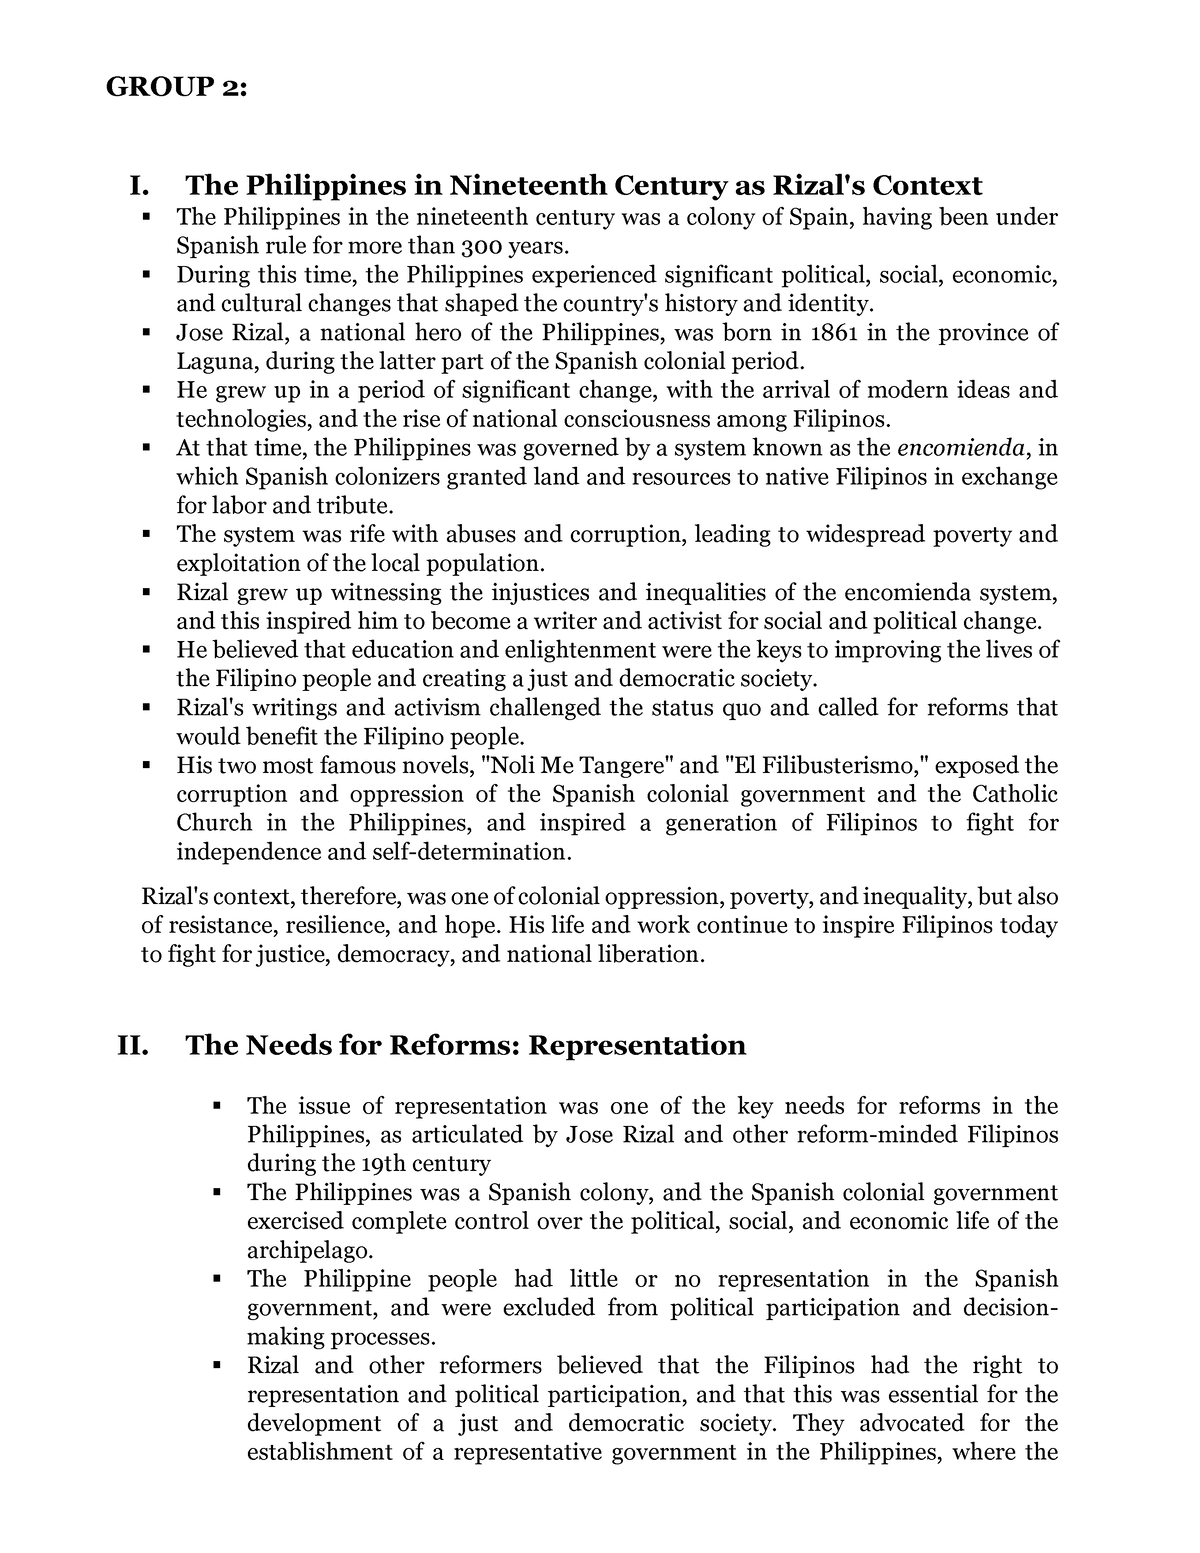 GE 10 Group 2 Report - Community - GROUP 2: I. The Philippines in ...